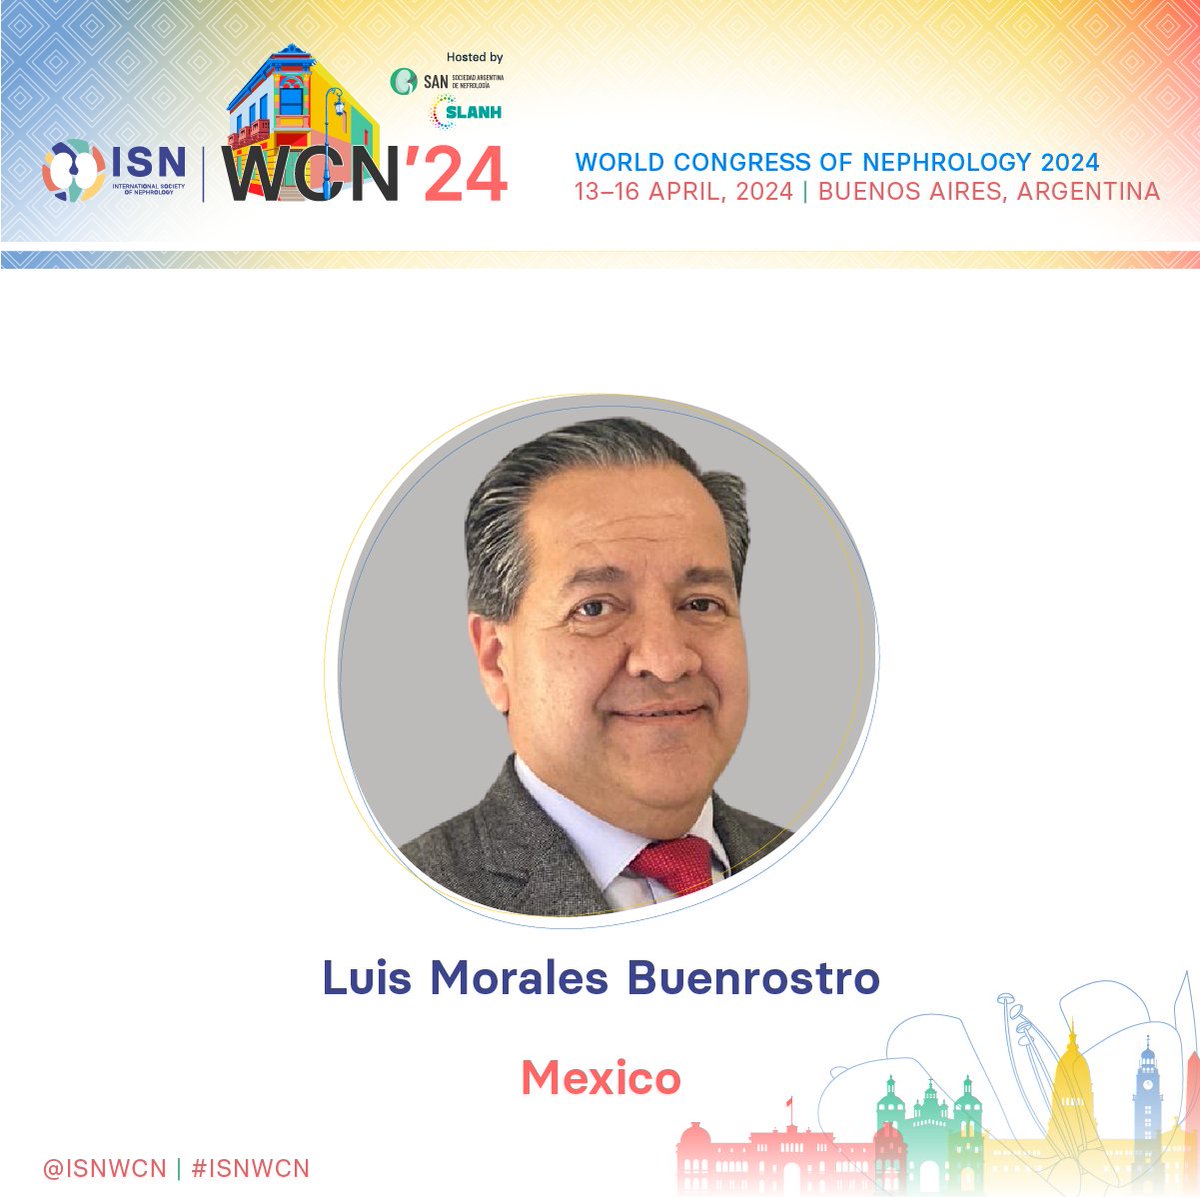 'The Many Challenges of Kidney Transplantation in Developing Countries: Latin America' 📆April 15 📍Hall A ⏰09:18-09:36 🇲🇽 Luis Morales Buenrostro #ISNWCN #KidneyTransplant